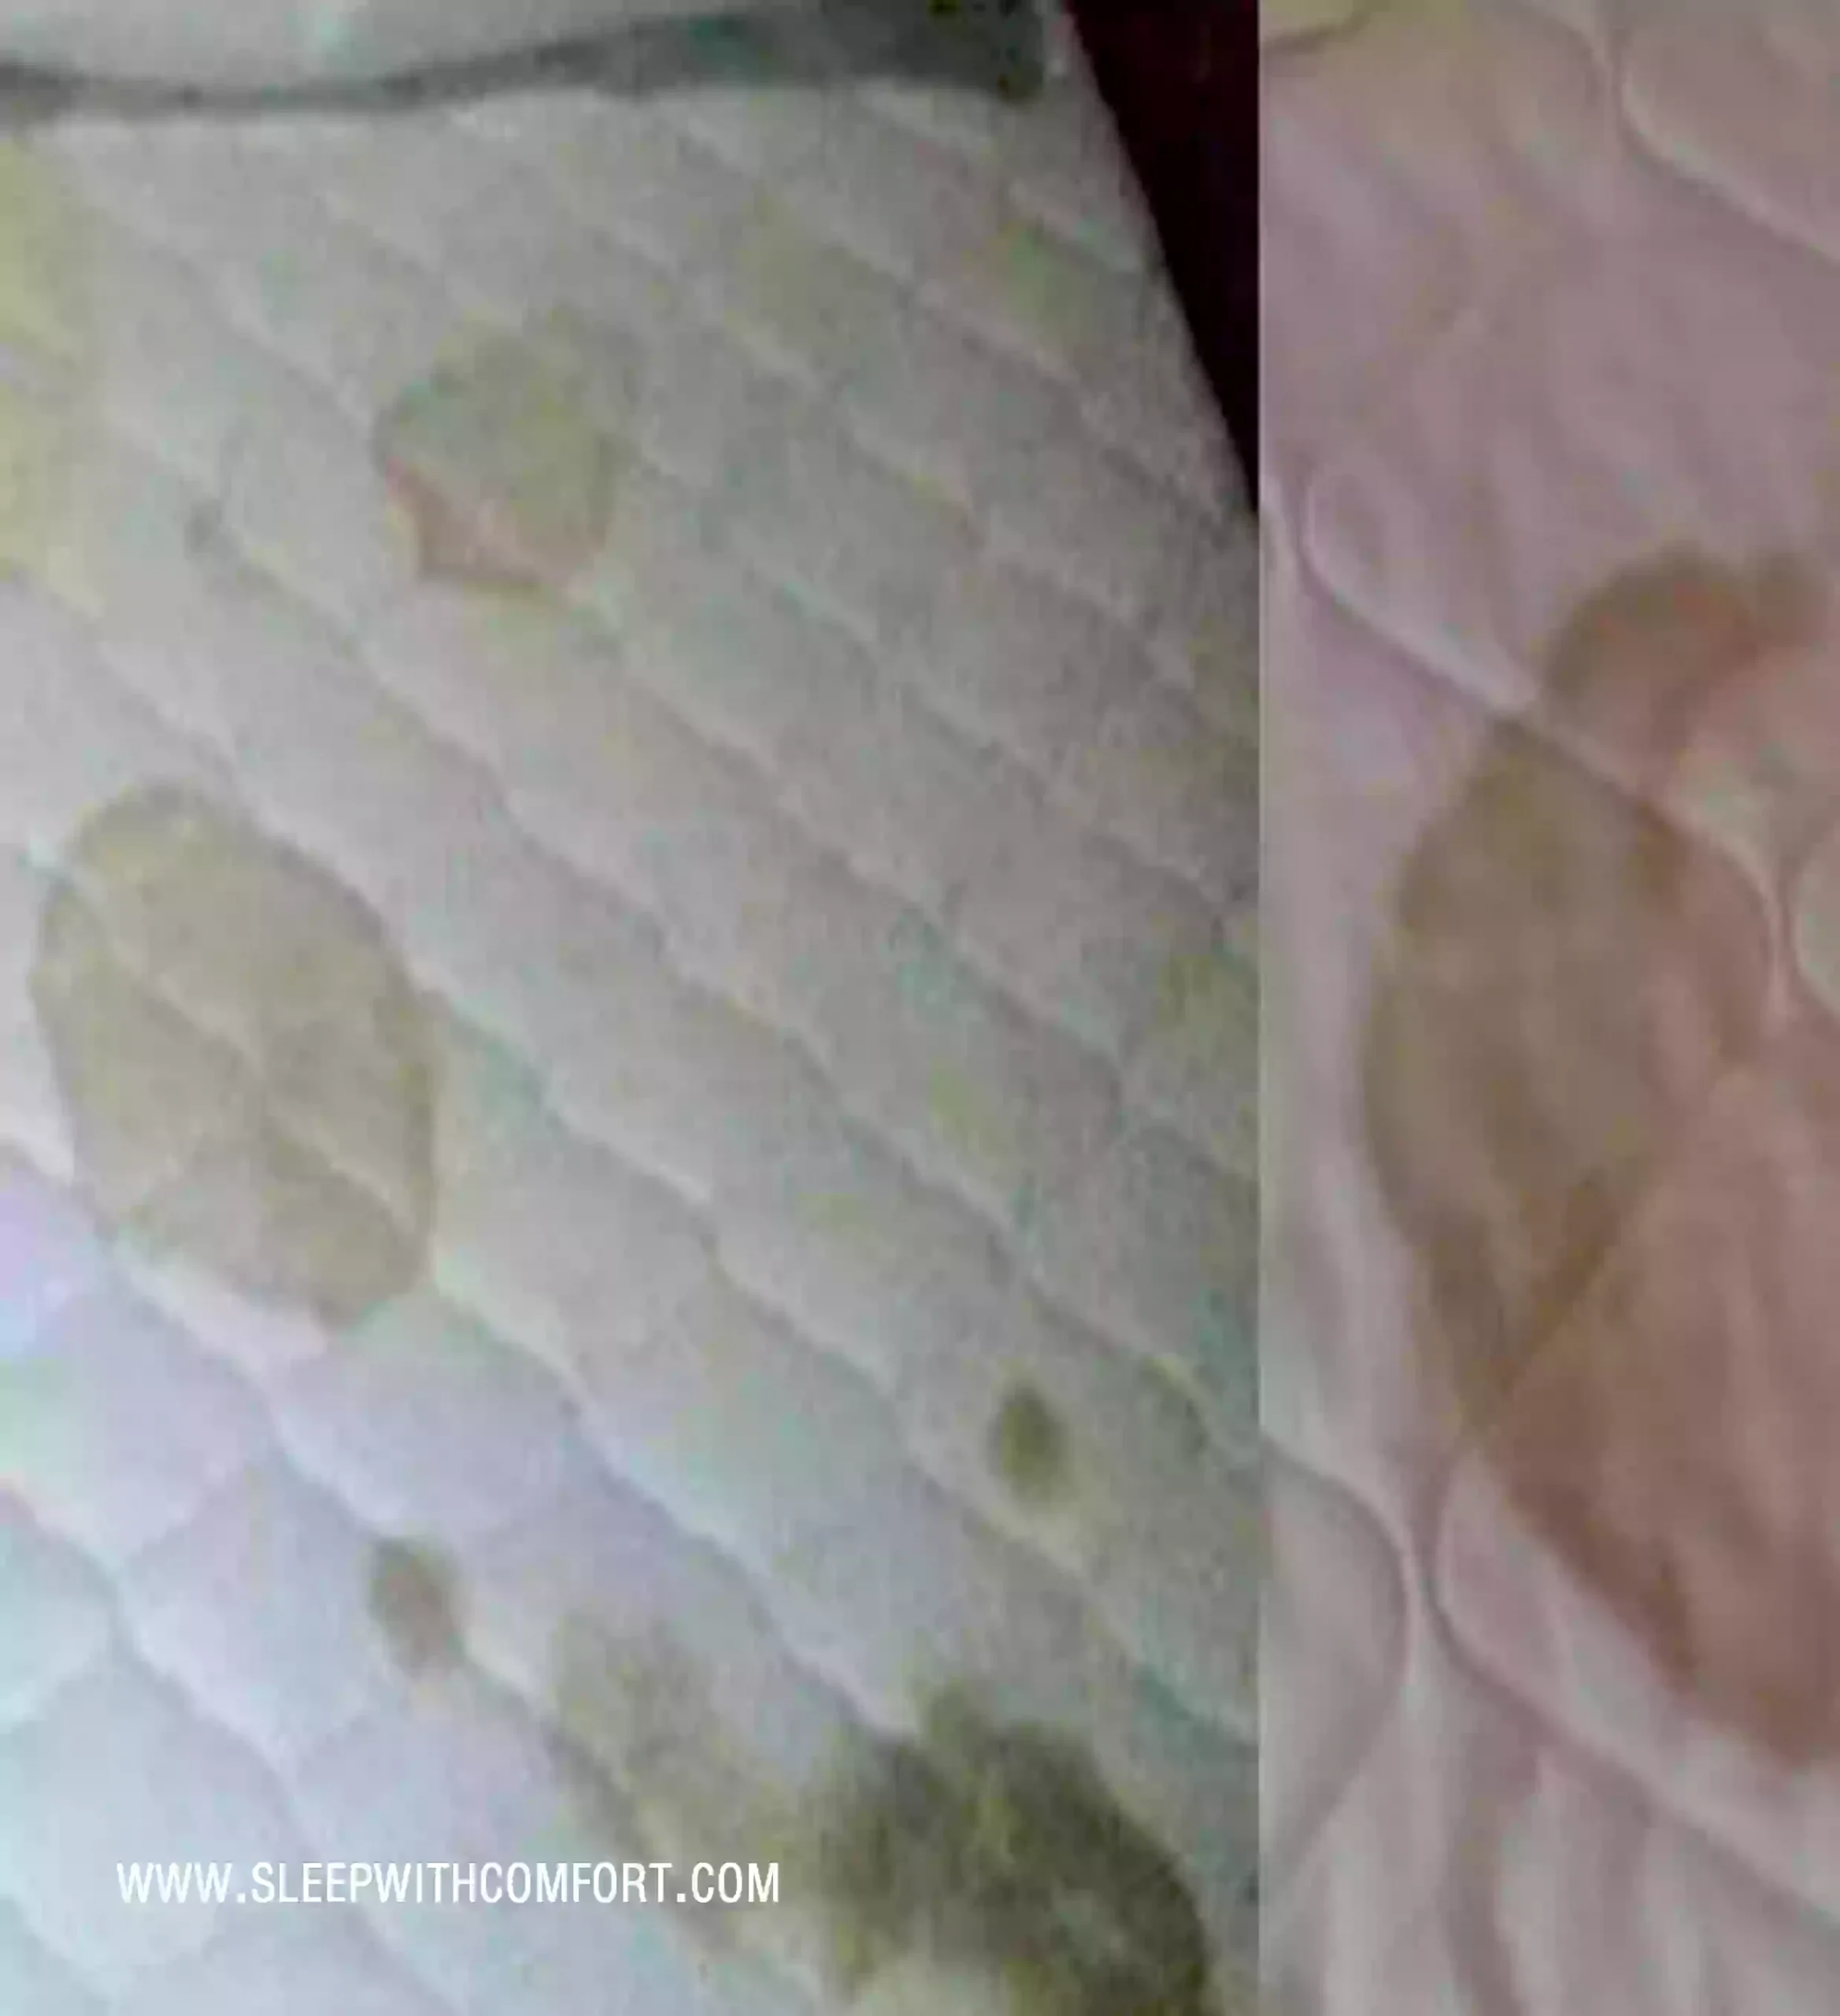 HOW TO CLEAN BLOOD OFF A MATTRESS